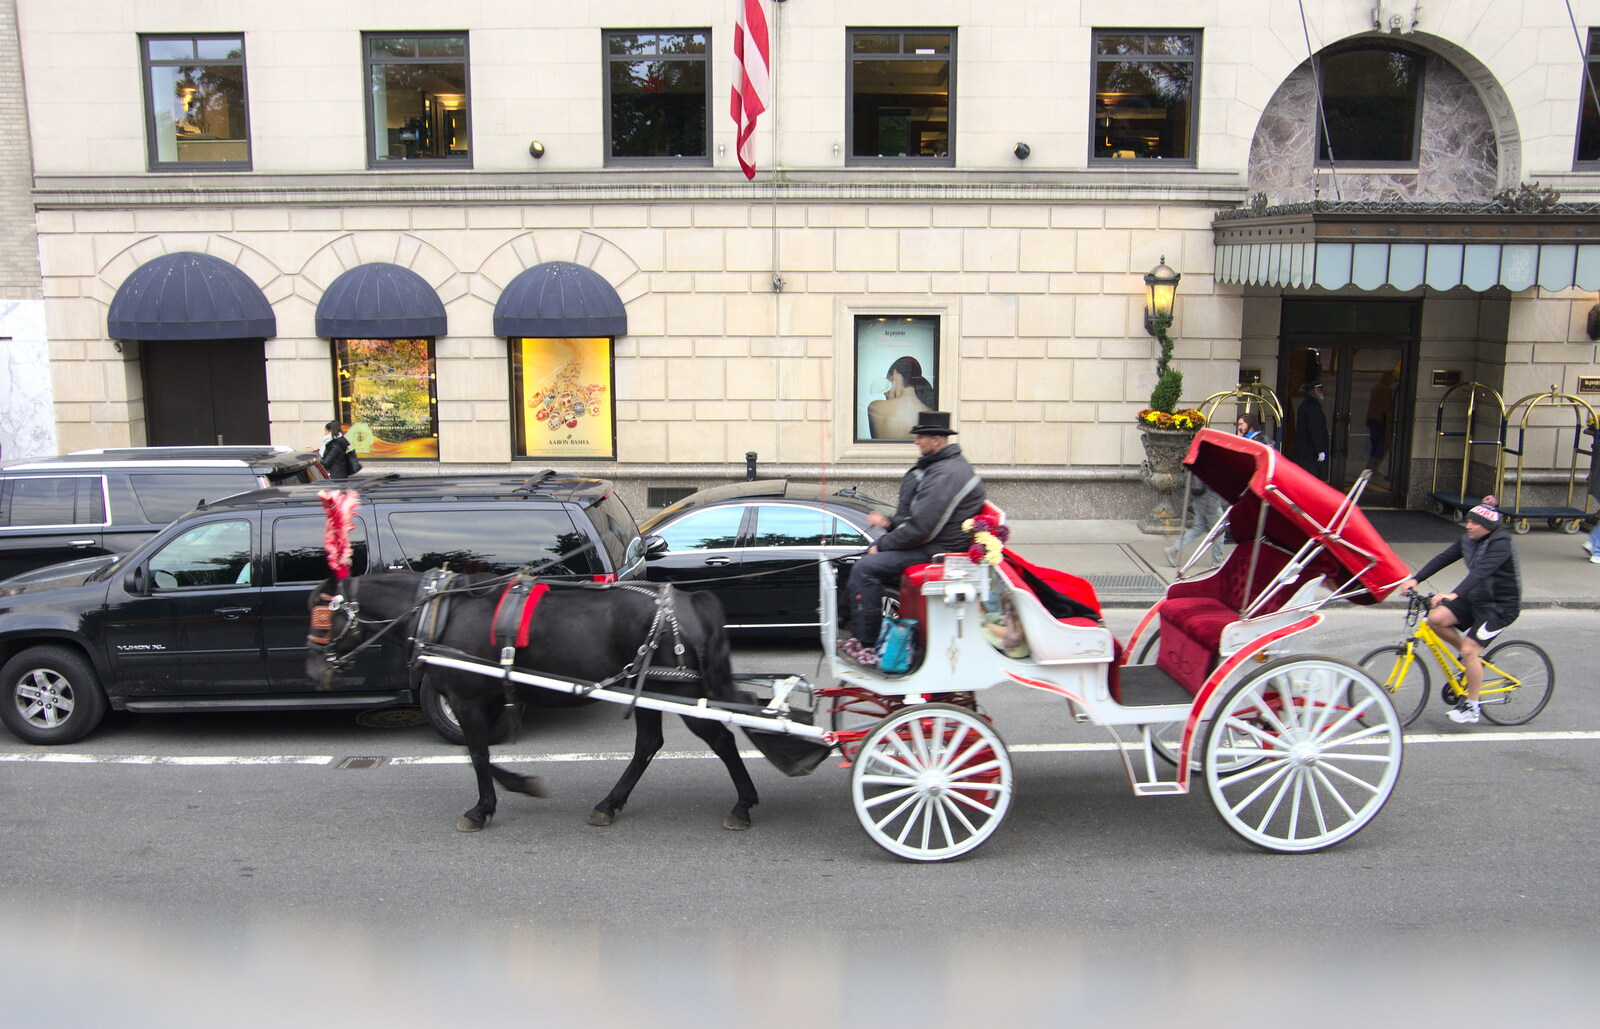 A tourist pony and cart from Open-top Buses and a Day at the Museum, New York, United States - 22nd October 2018